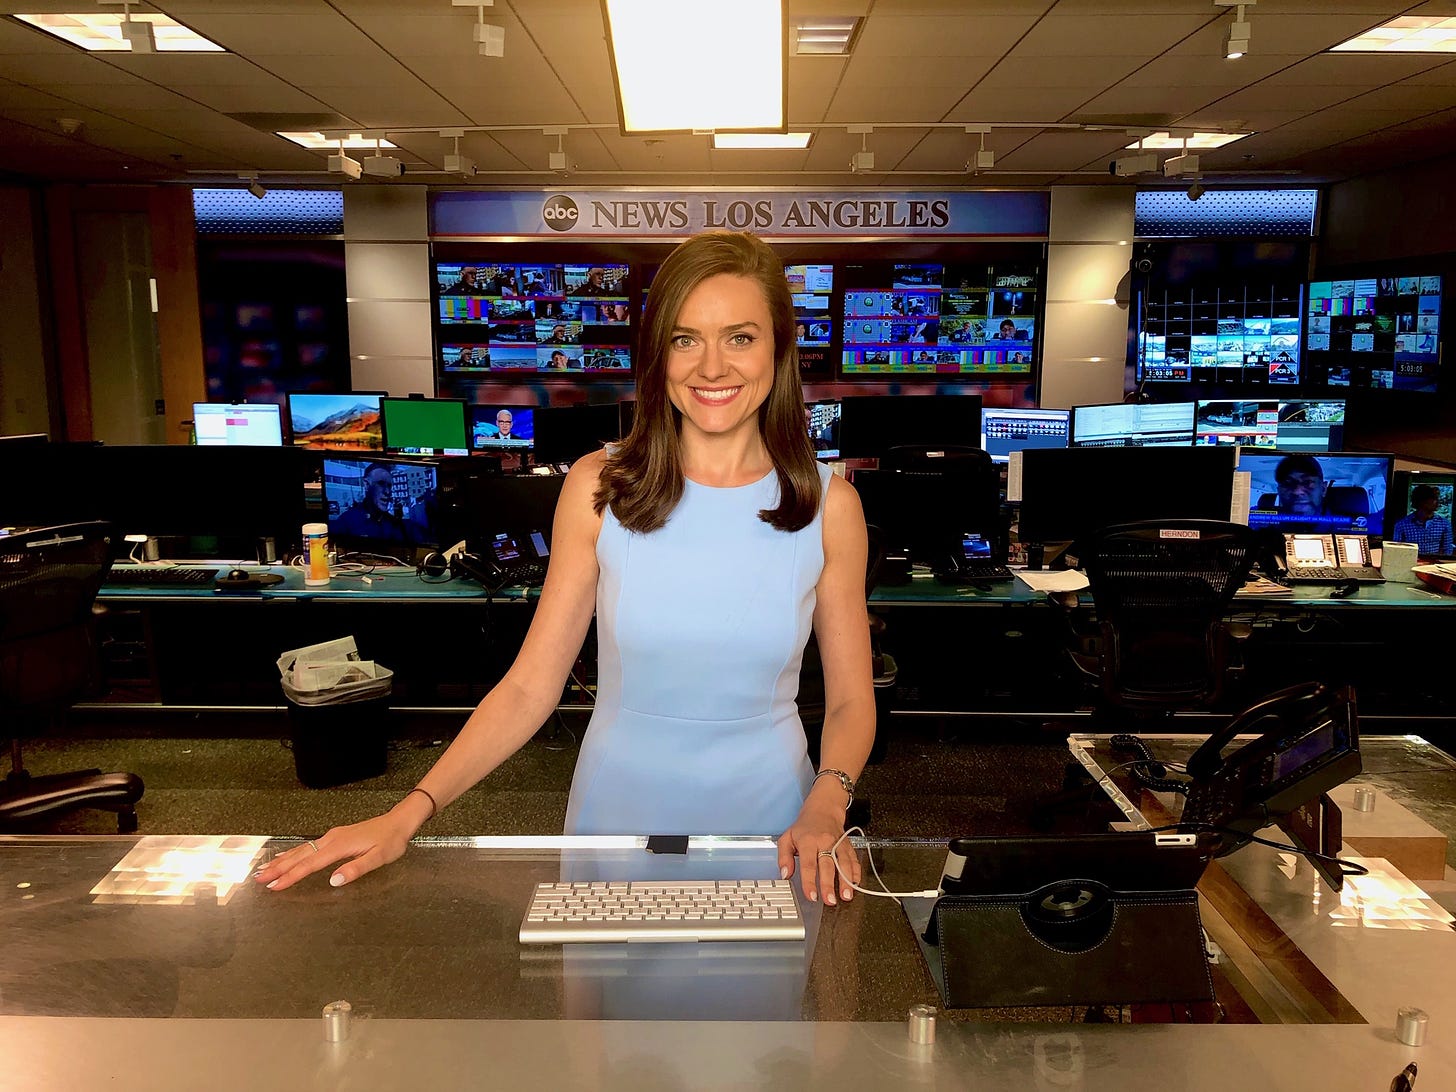 File:TV News reporter Natalie Brunell at the ABC Los Angles anchor desk.jpg  - Wikimedia Commons